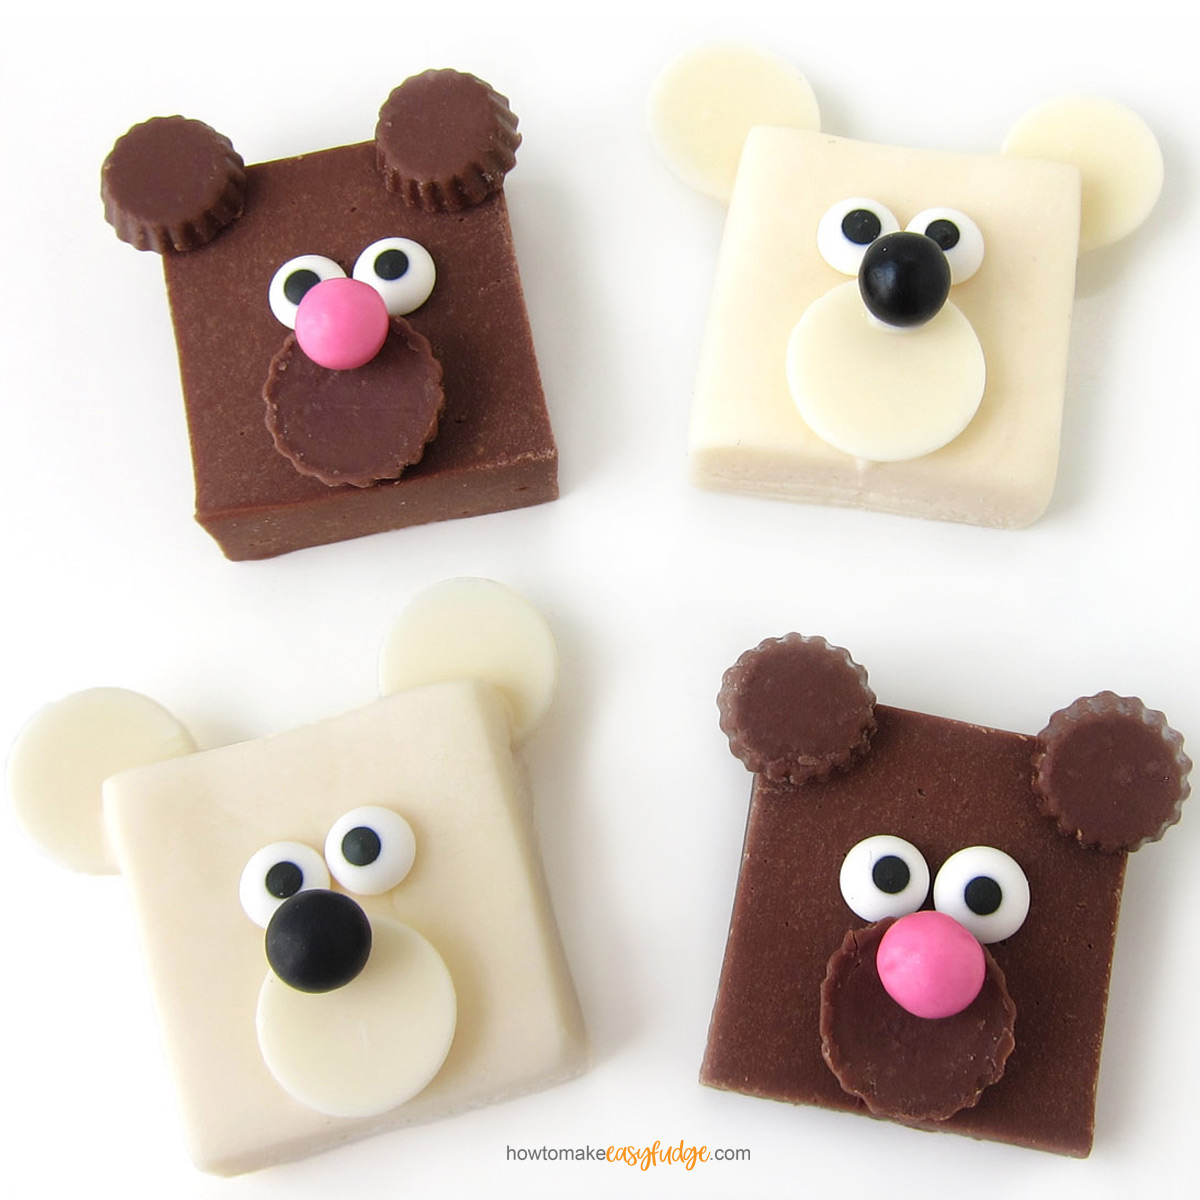 White and milk chocolate fudge bears decorated with candy eyes, nose, and ears